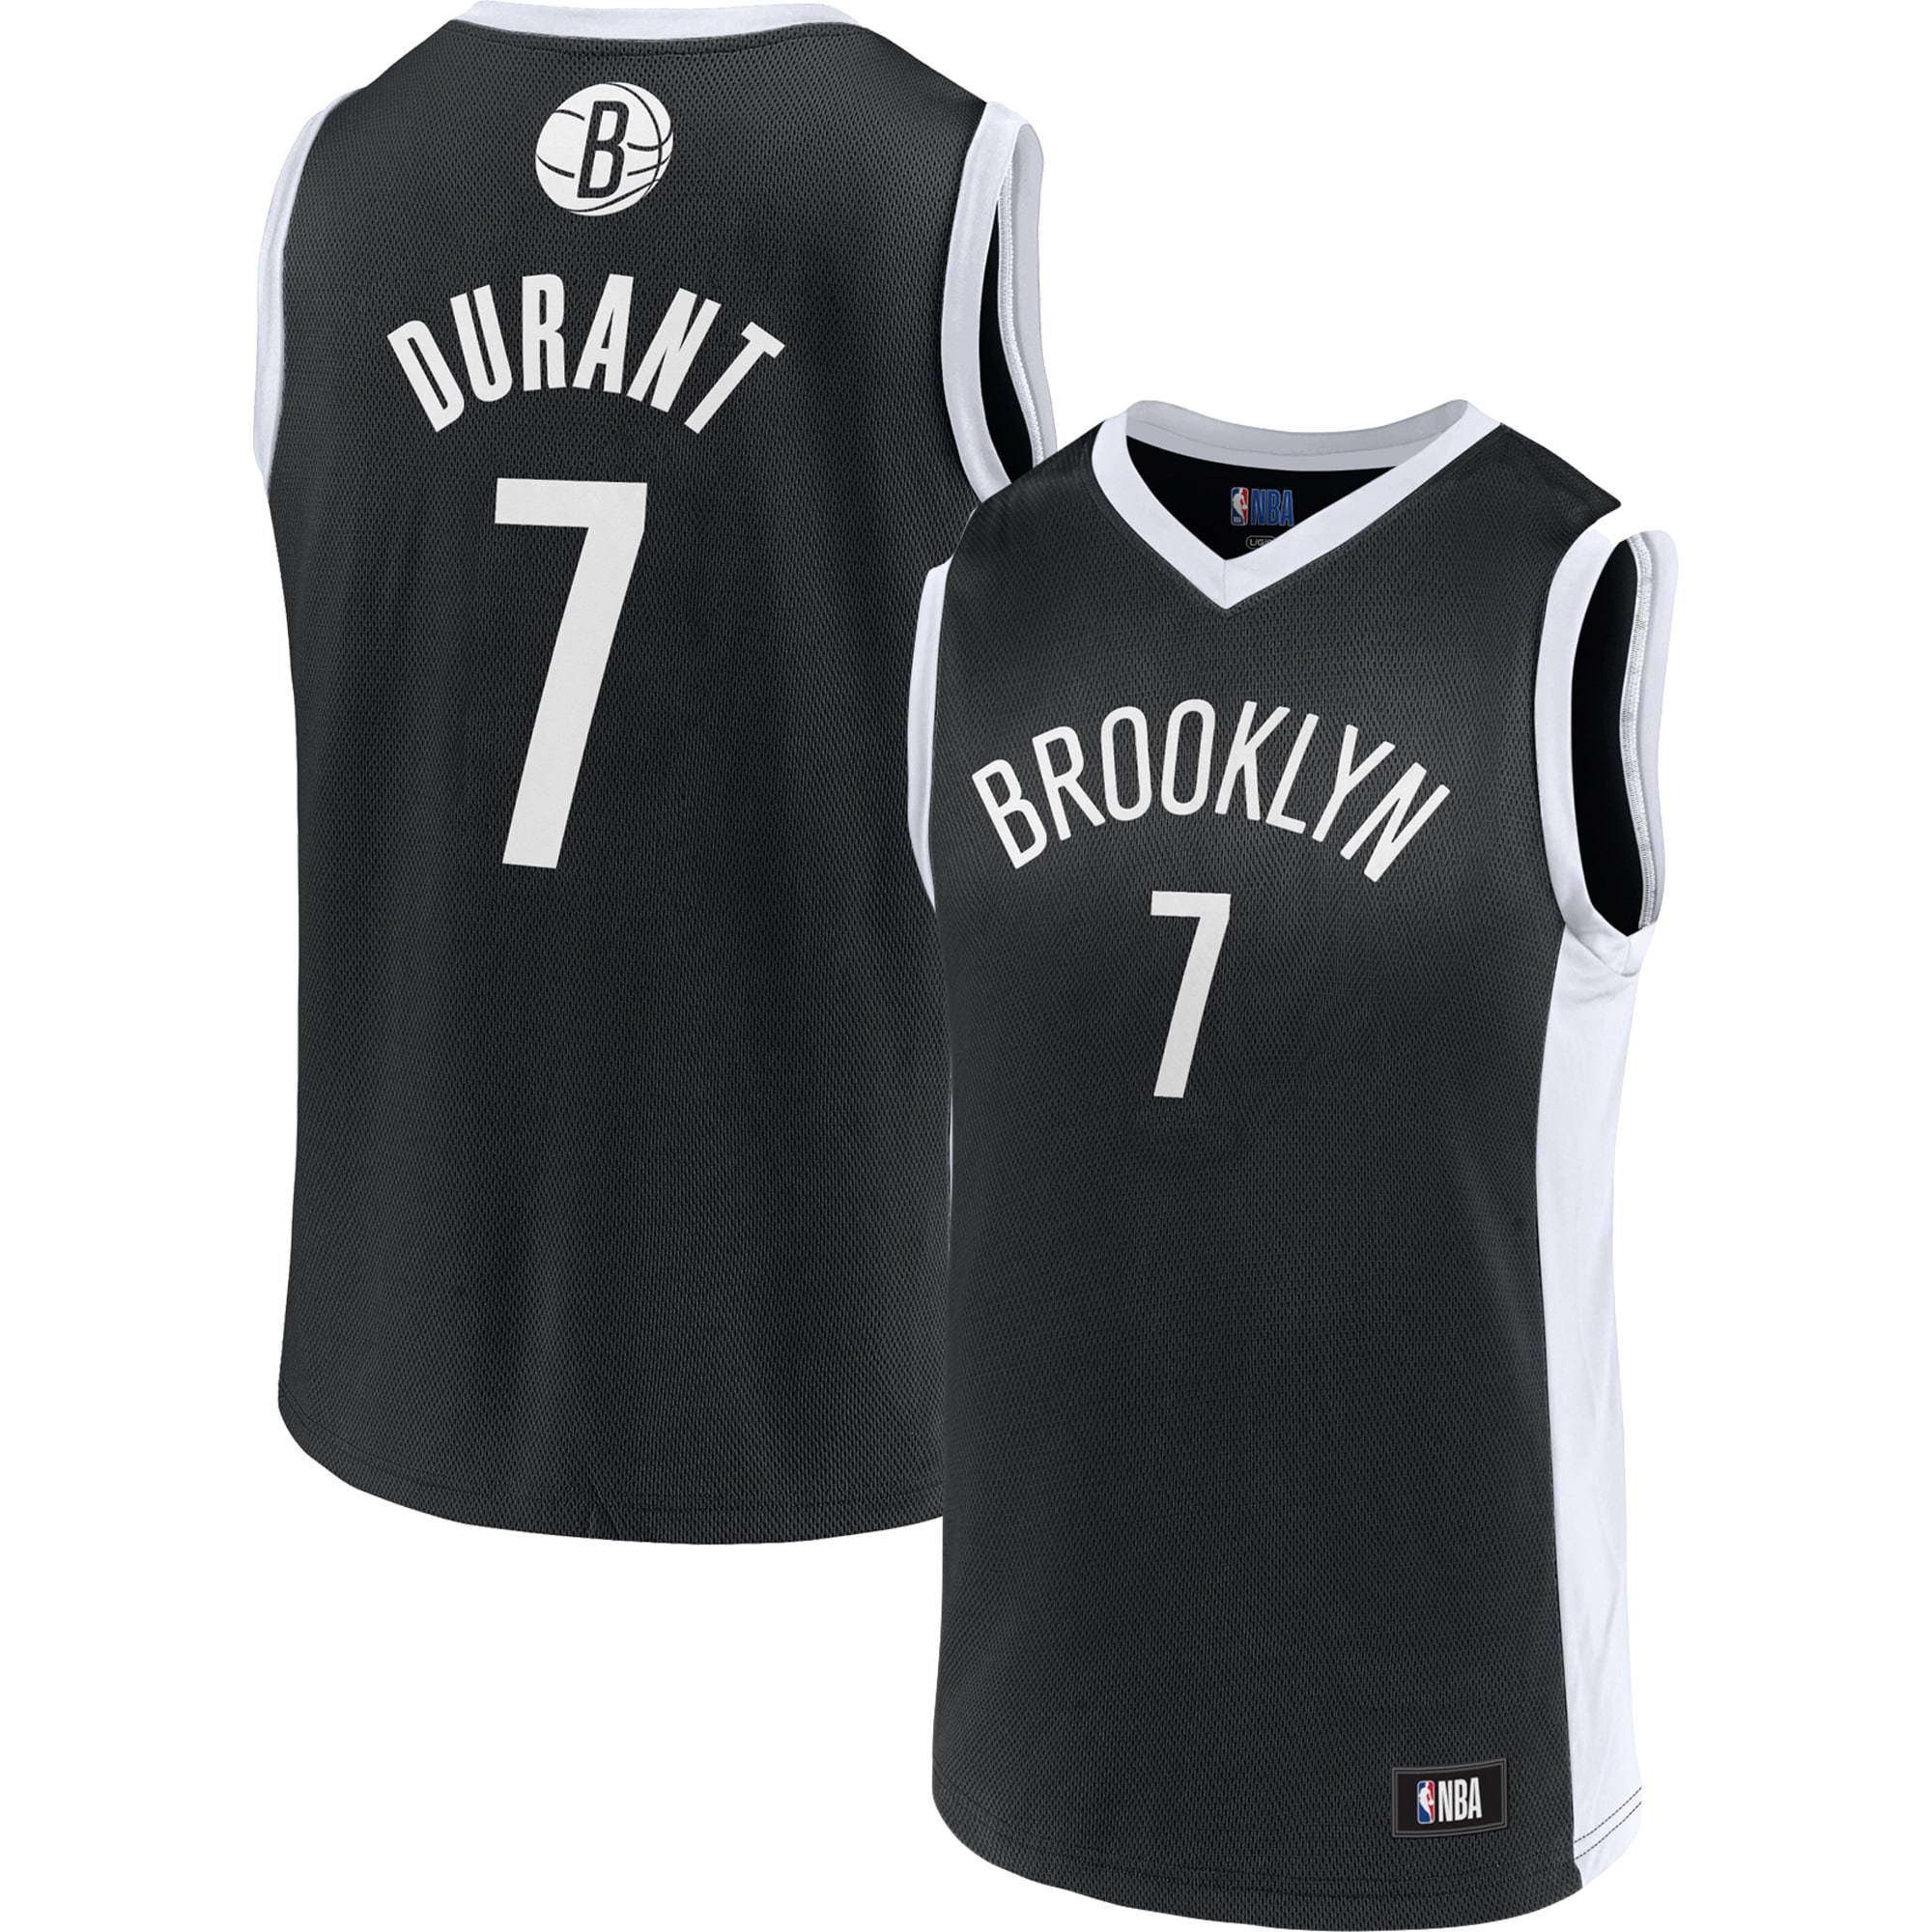 Men's Fanatics Branded Kevin Durant Black Brooklyn Nets Player Jersey - image 1 of 3